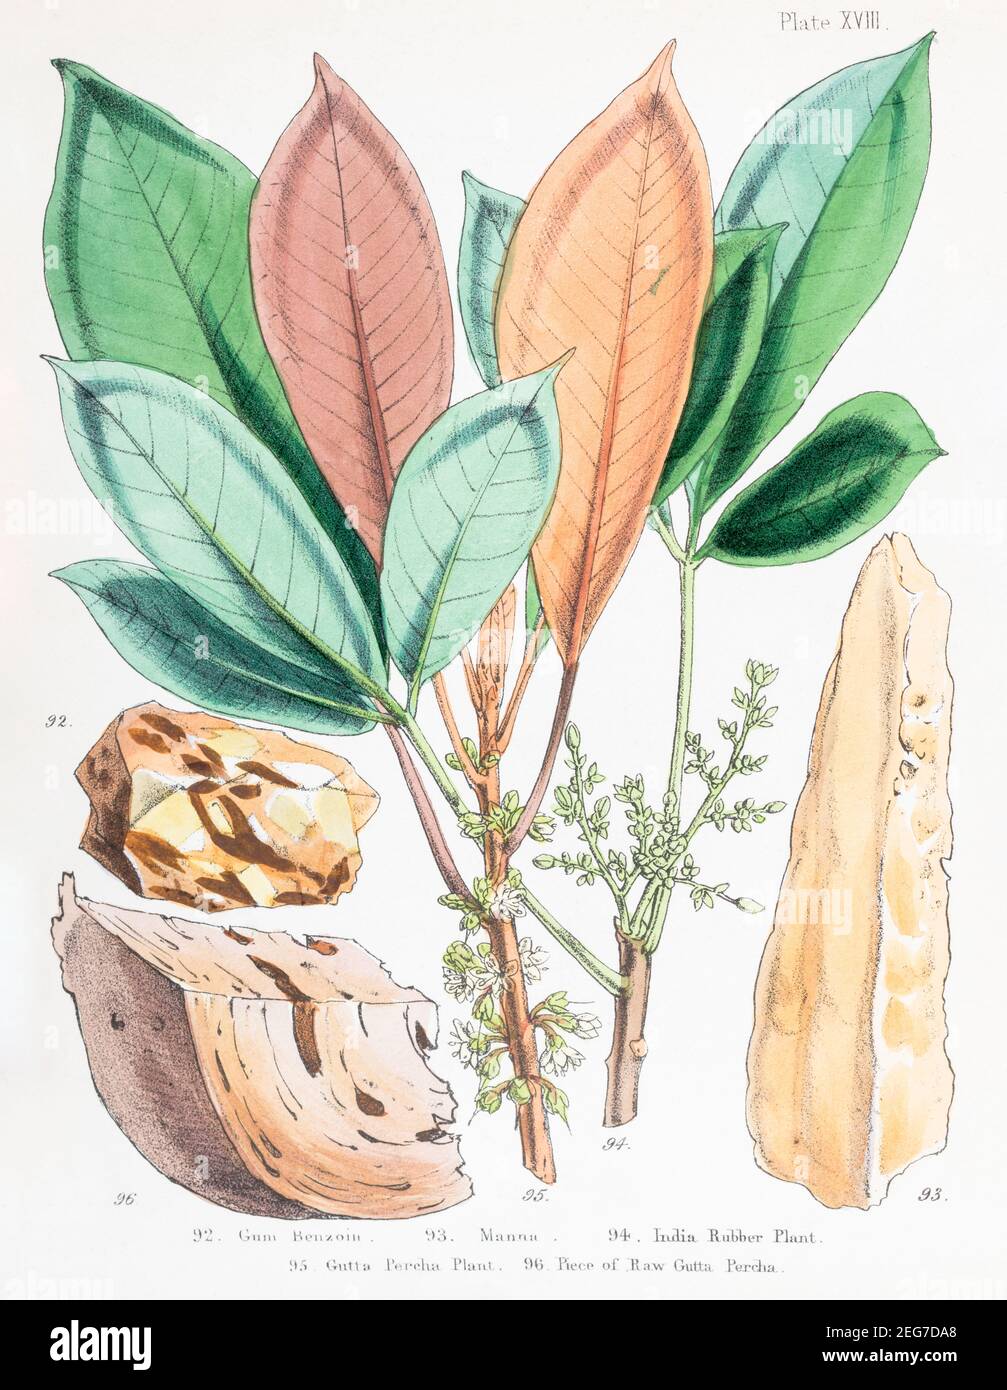 19th c. hand-painted Victorian botanical illustration of Gum Benzoin & Manna, India Rubber & Gutta Percha plants + raw Gutta Percha. See notes. Stock Photo